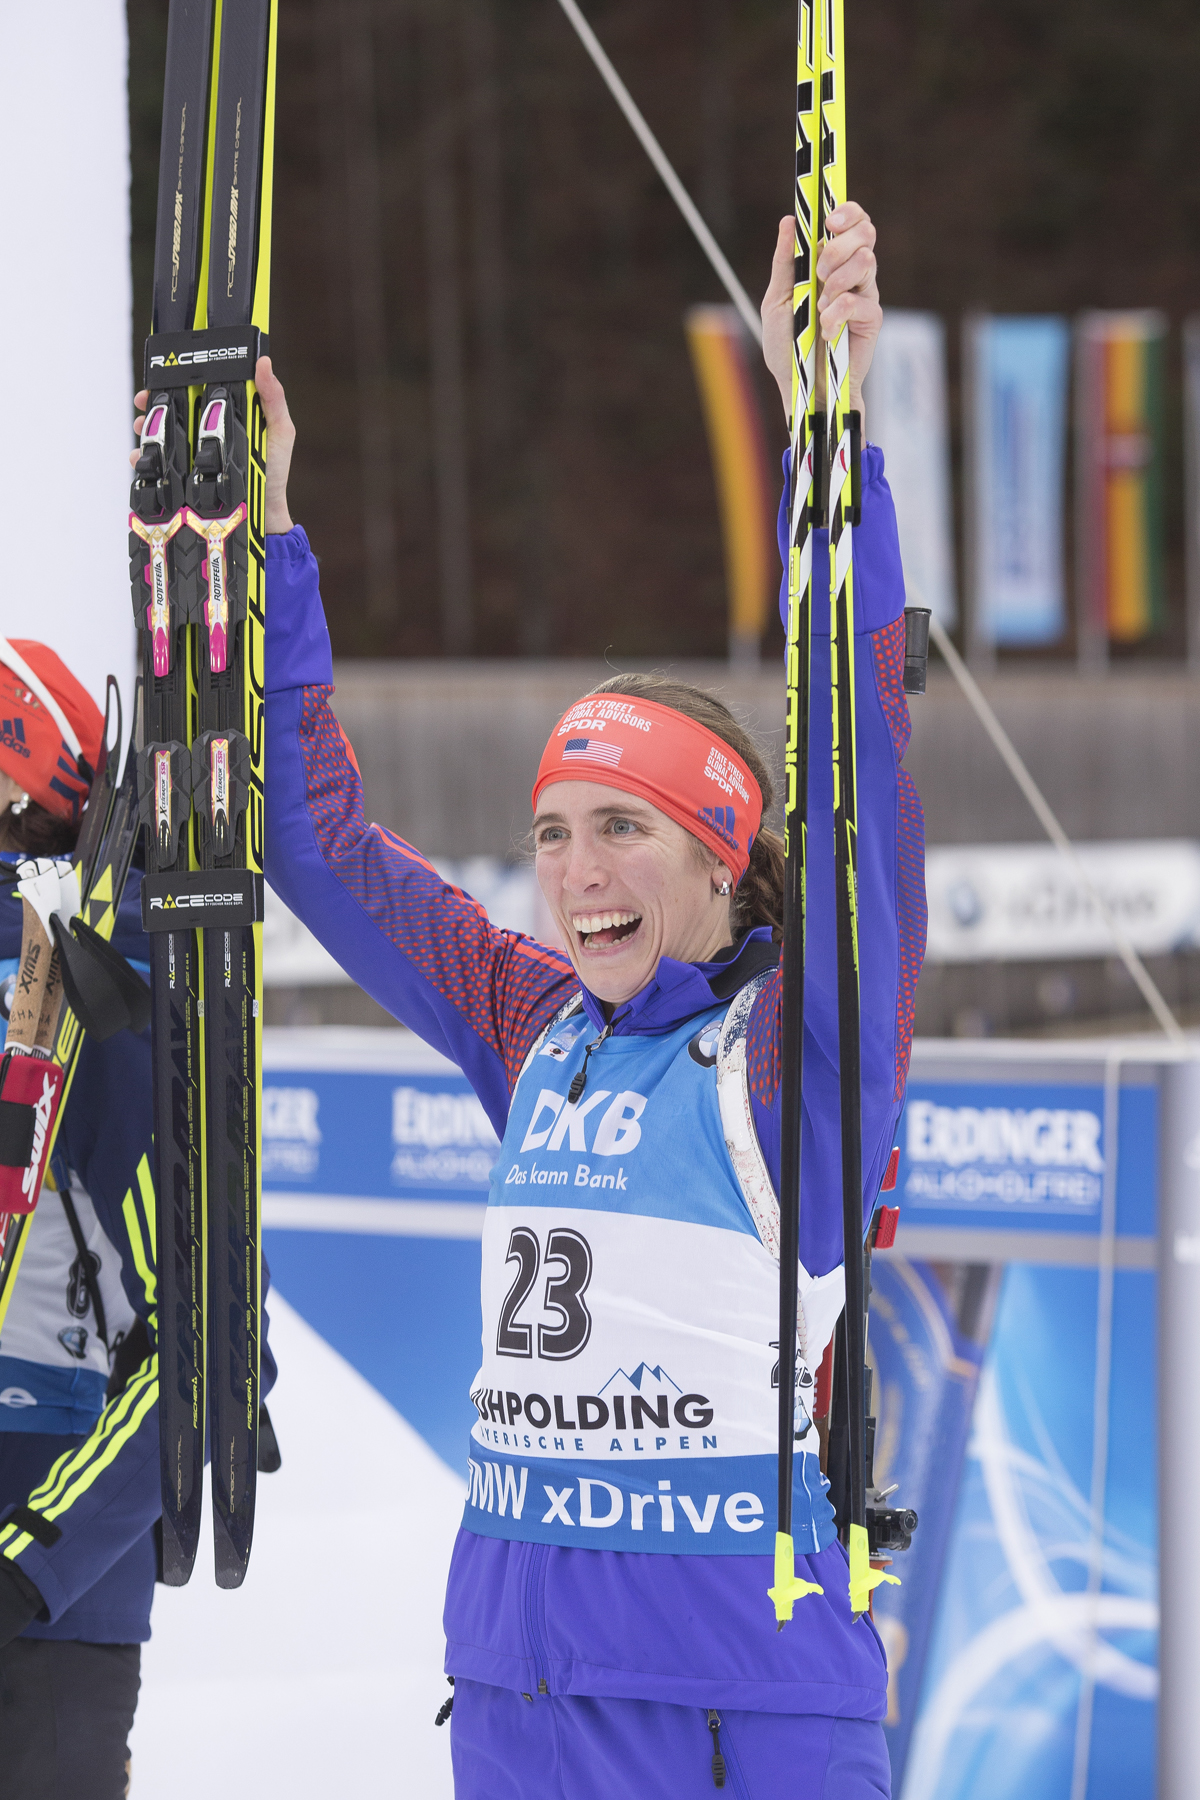 Dunklee’s Podium Fight Ends in Sixth; Dahlmeier Wins Again in Ruhpolding